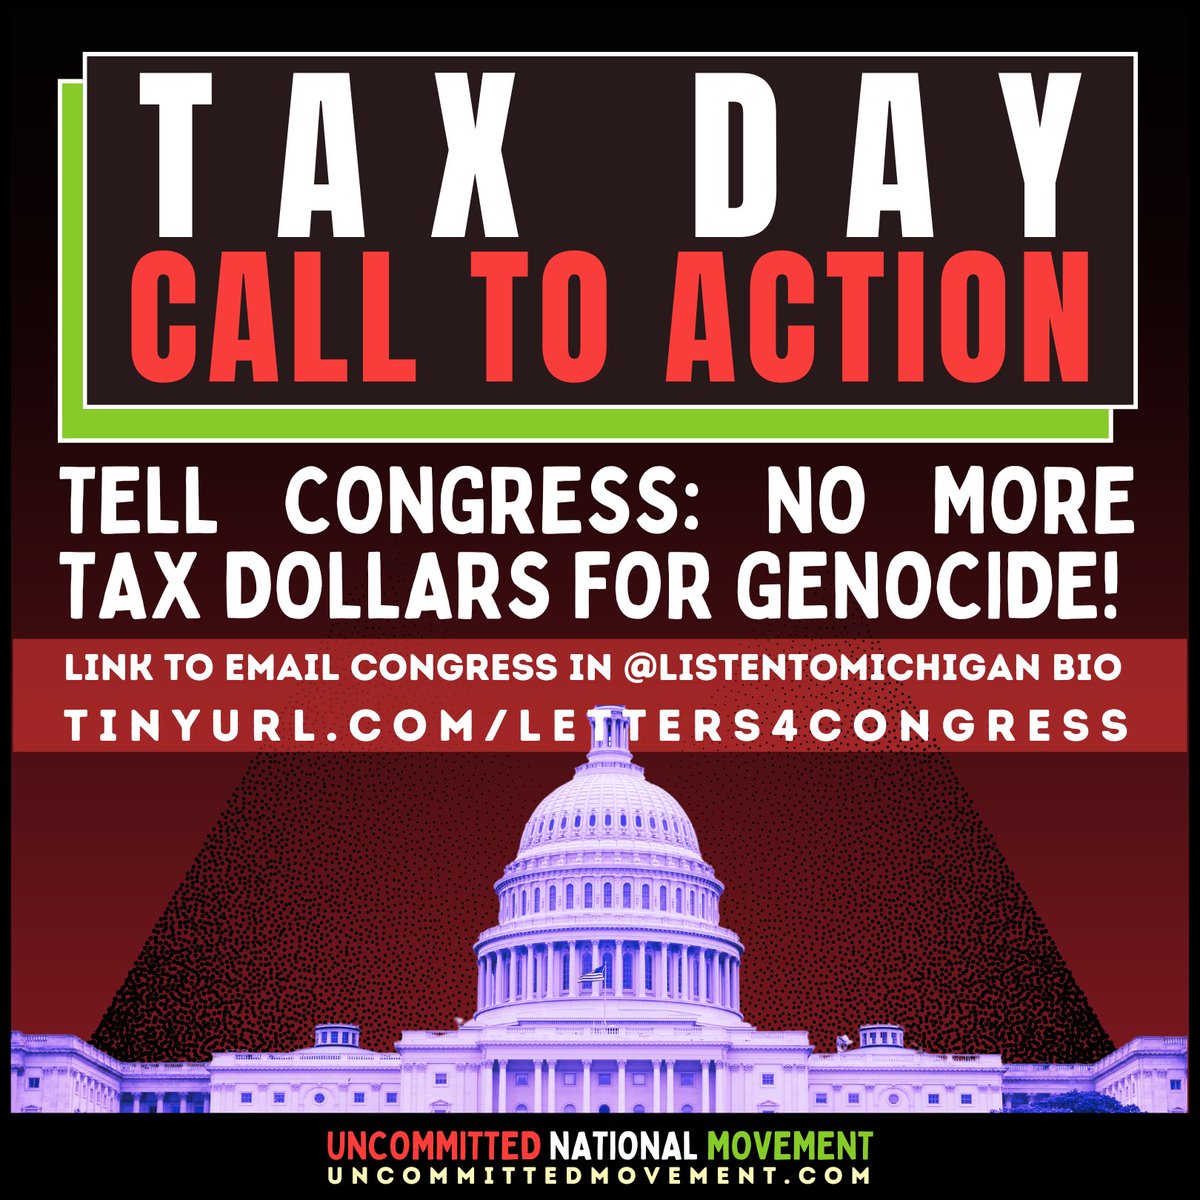 On tax day, tell Congress to stop using our tax dollars to fund genocide. Urge your members of Congress to halt military aid to Israel and work toward a permanent ceasefire in Gaza.